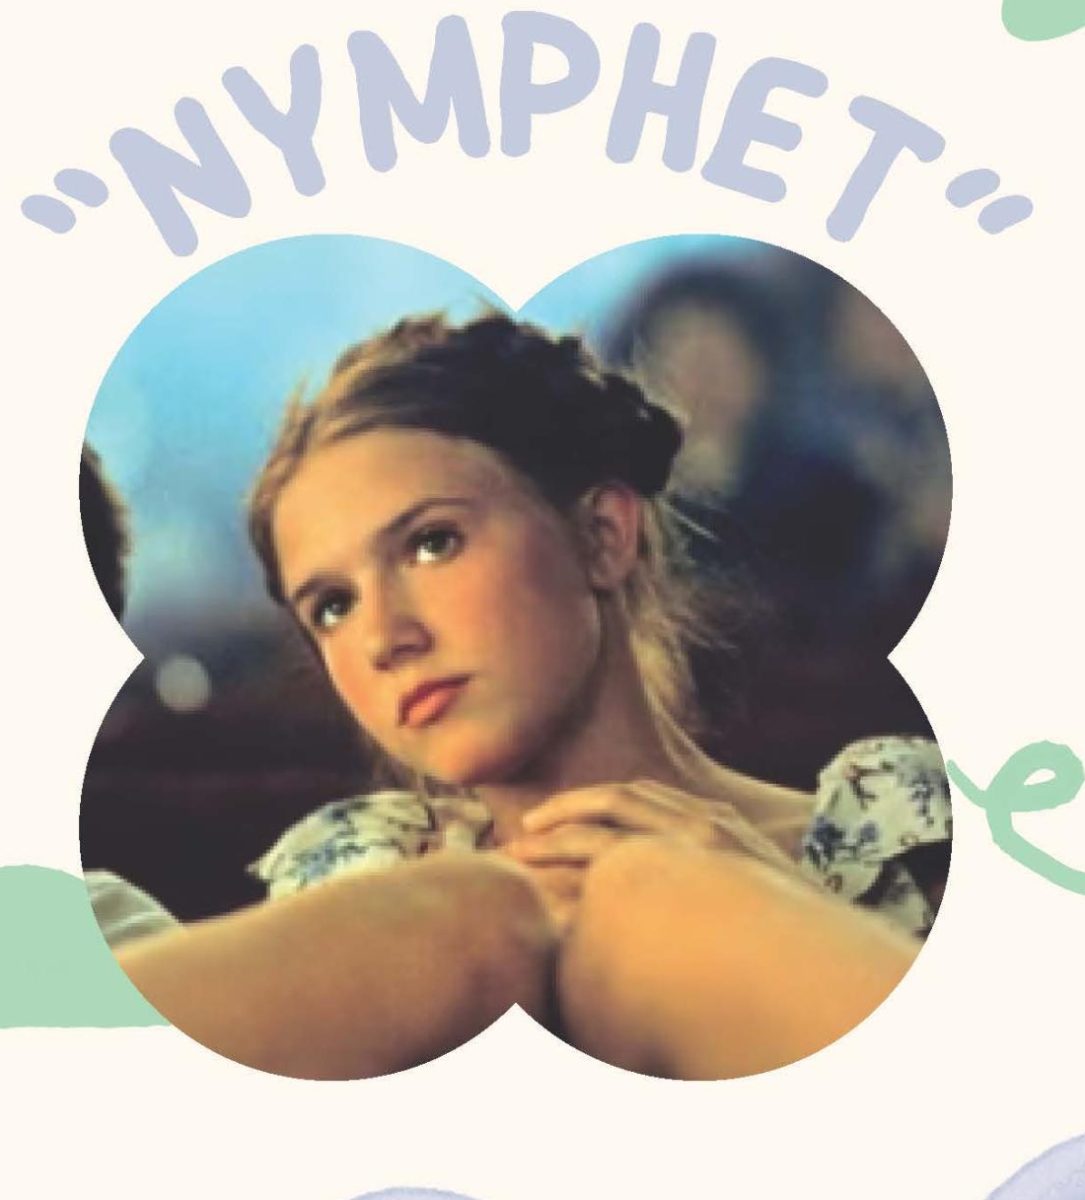 The still image used in this promotional material is of Dominique Swan from the 1997 film Lolita.